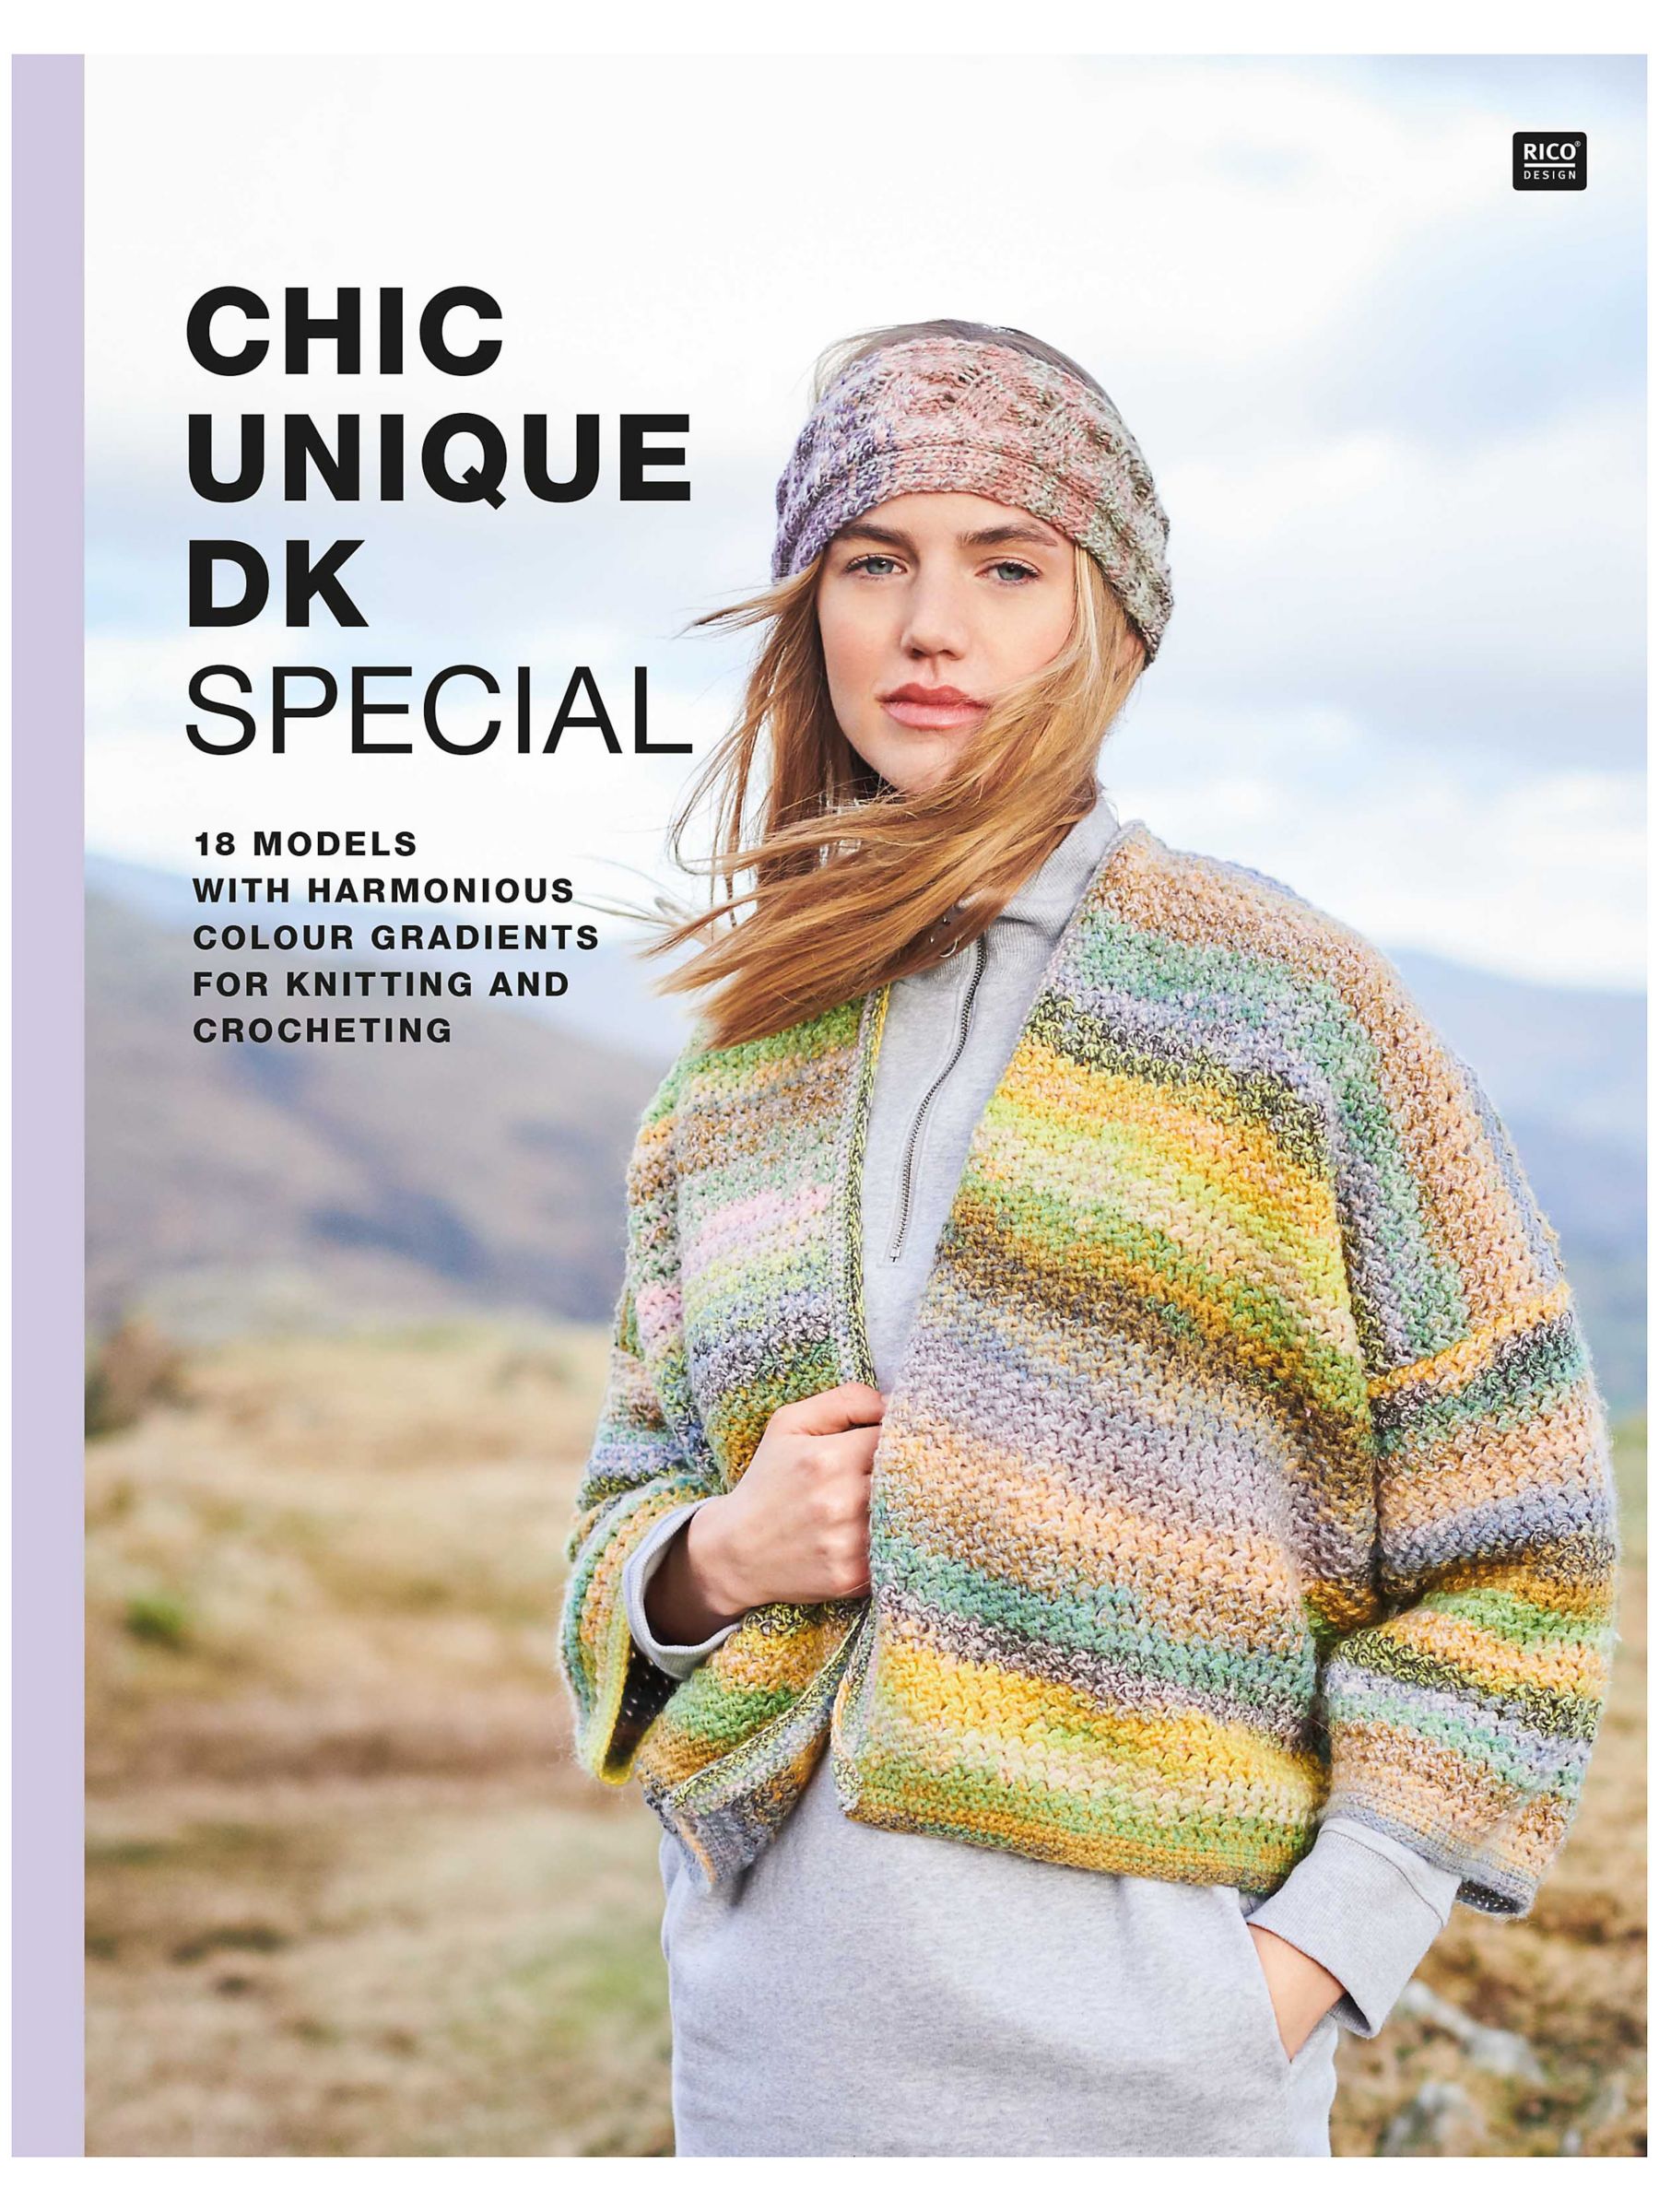 Geometric Knitting Patterns: A Sourcebook of Classic to Contemporary Designs